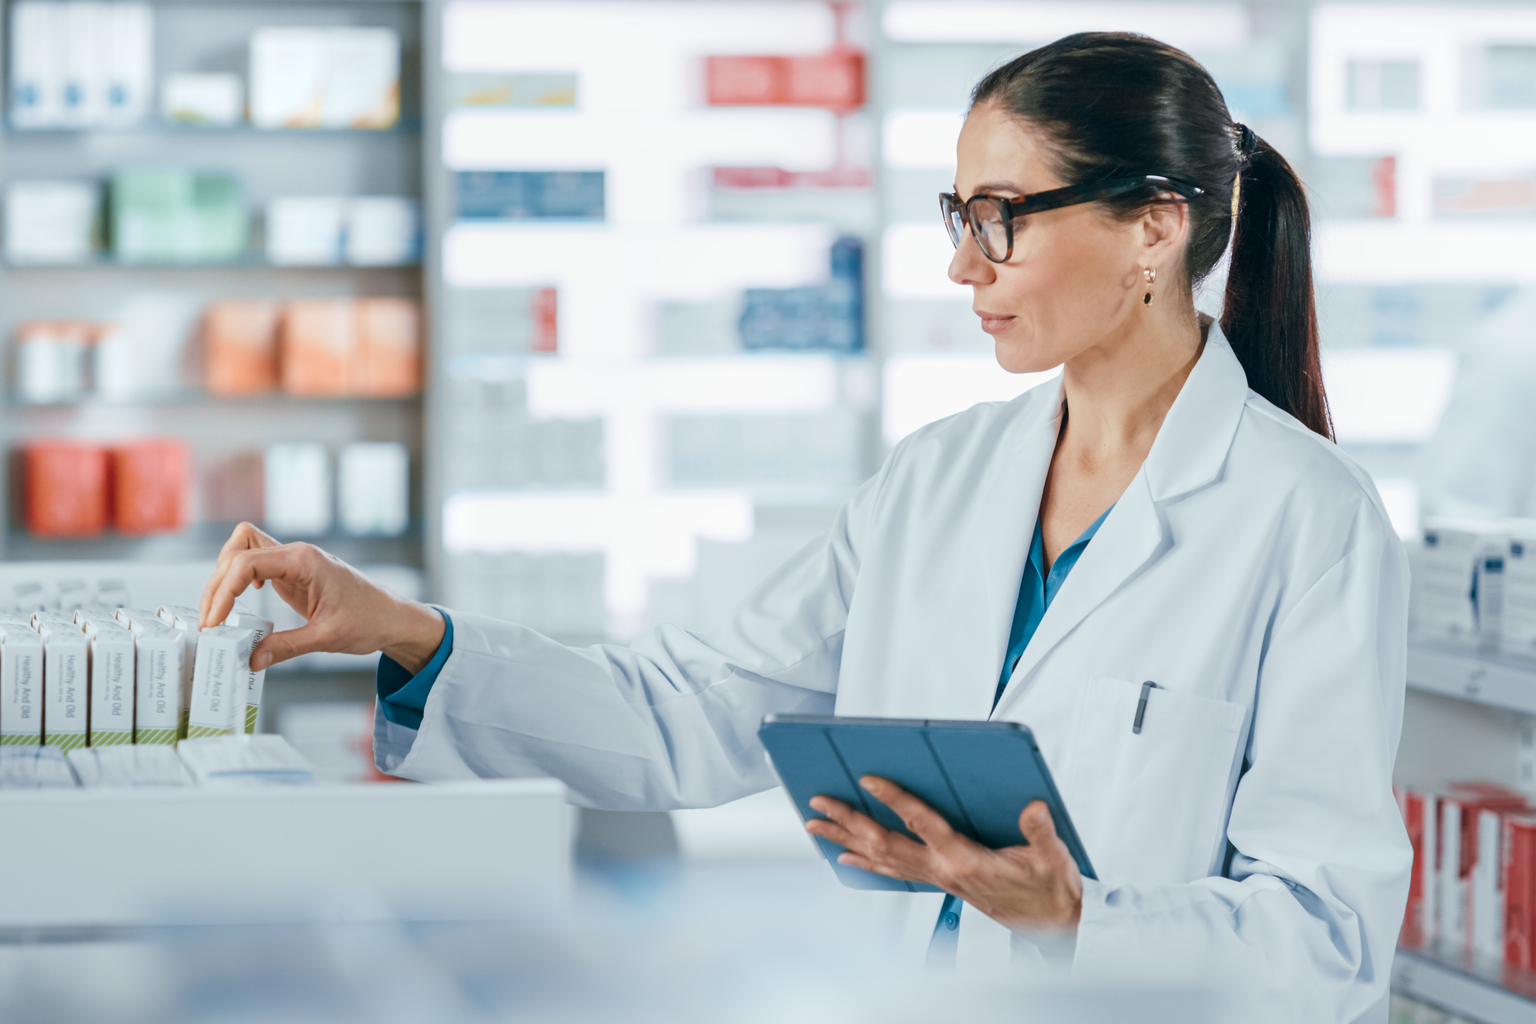 Pharmacists can increase patient trust through aligned content